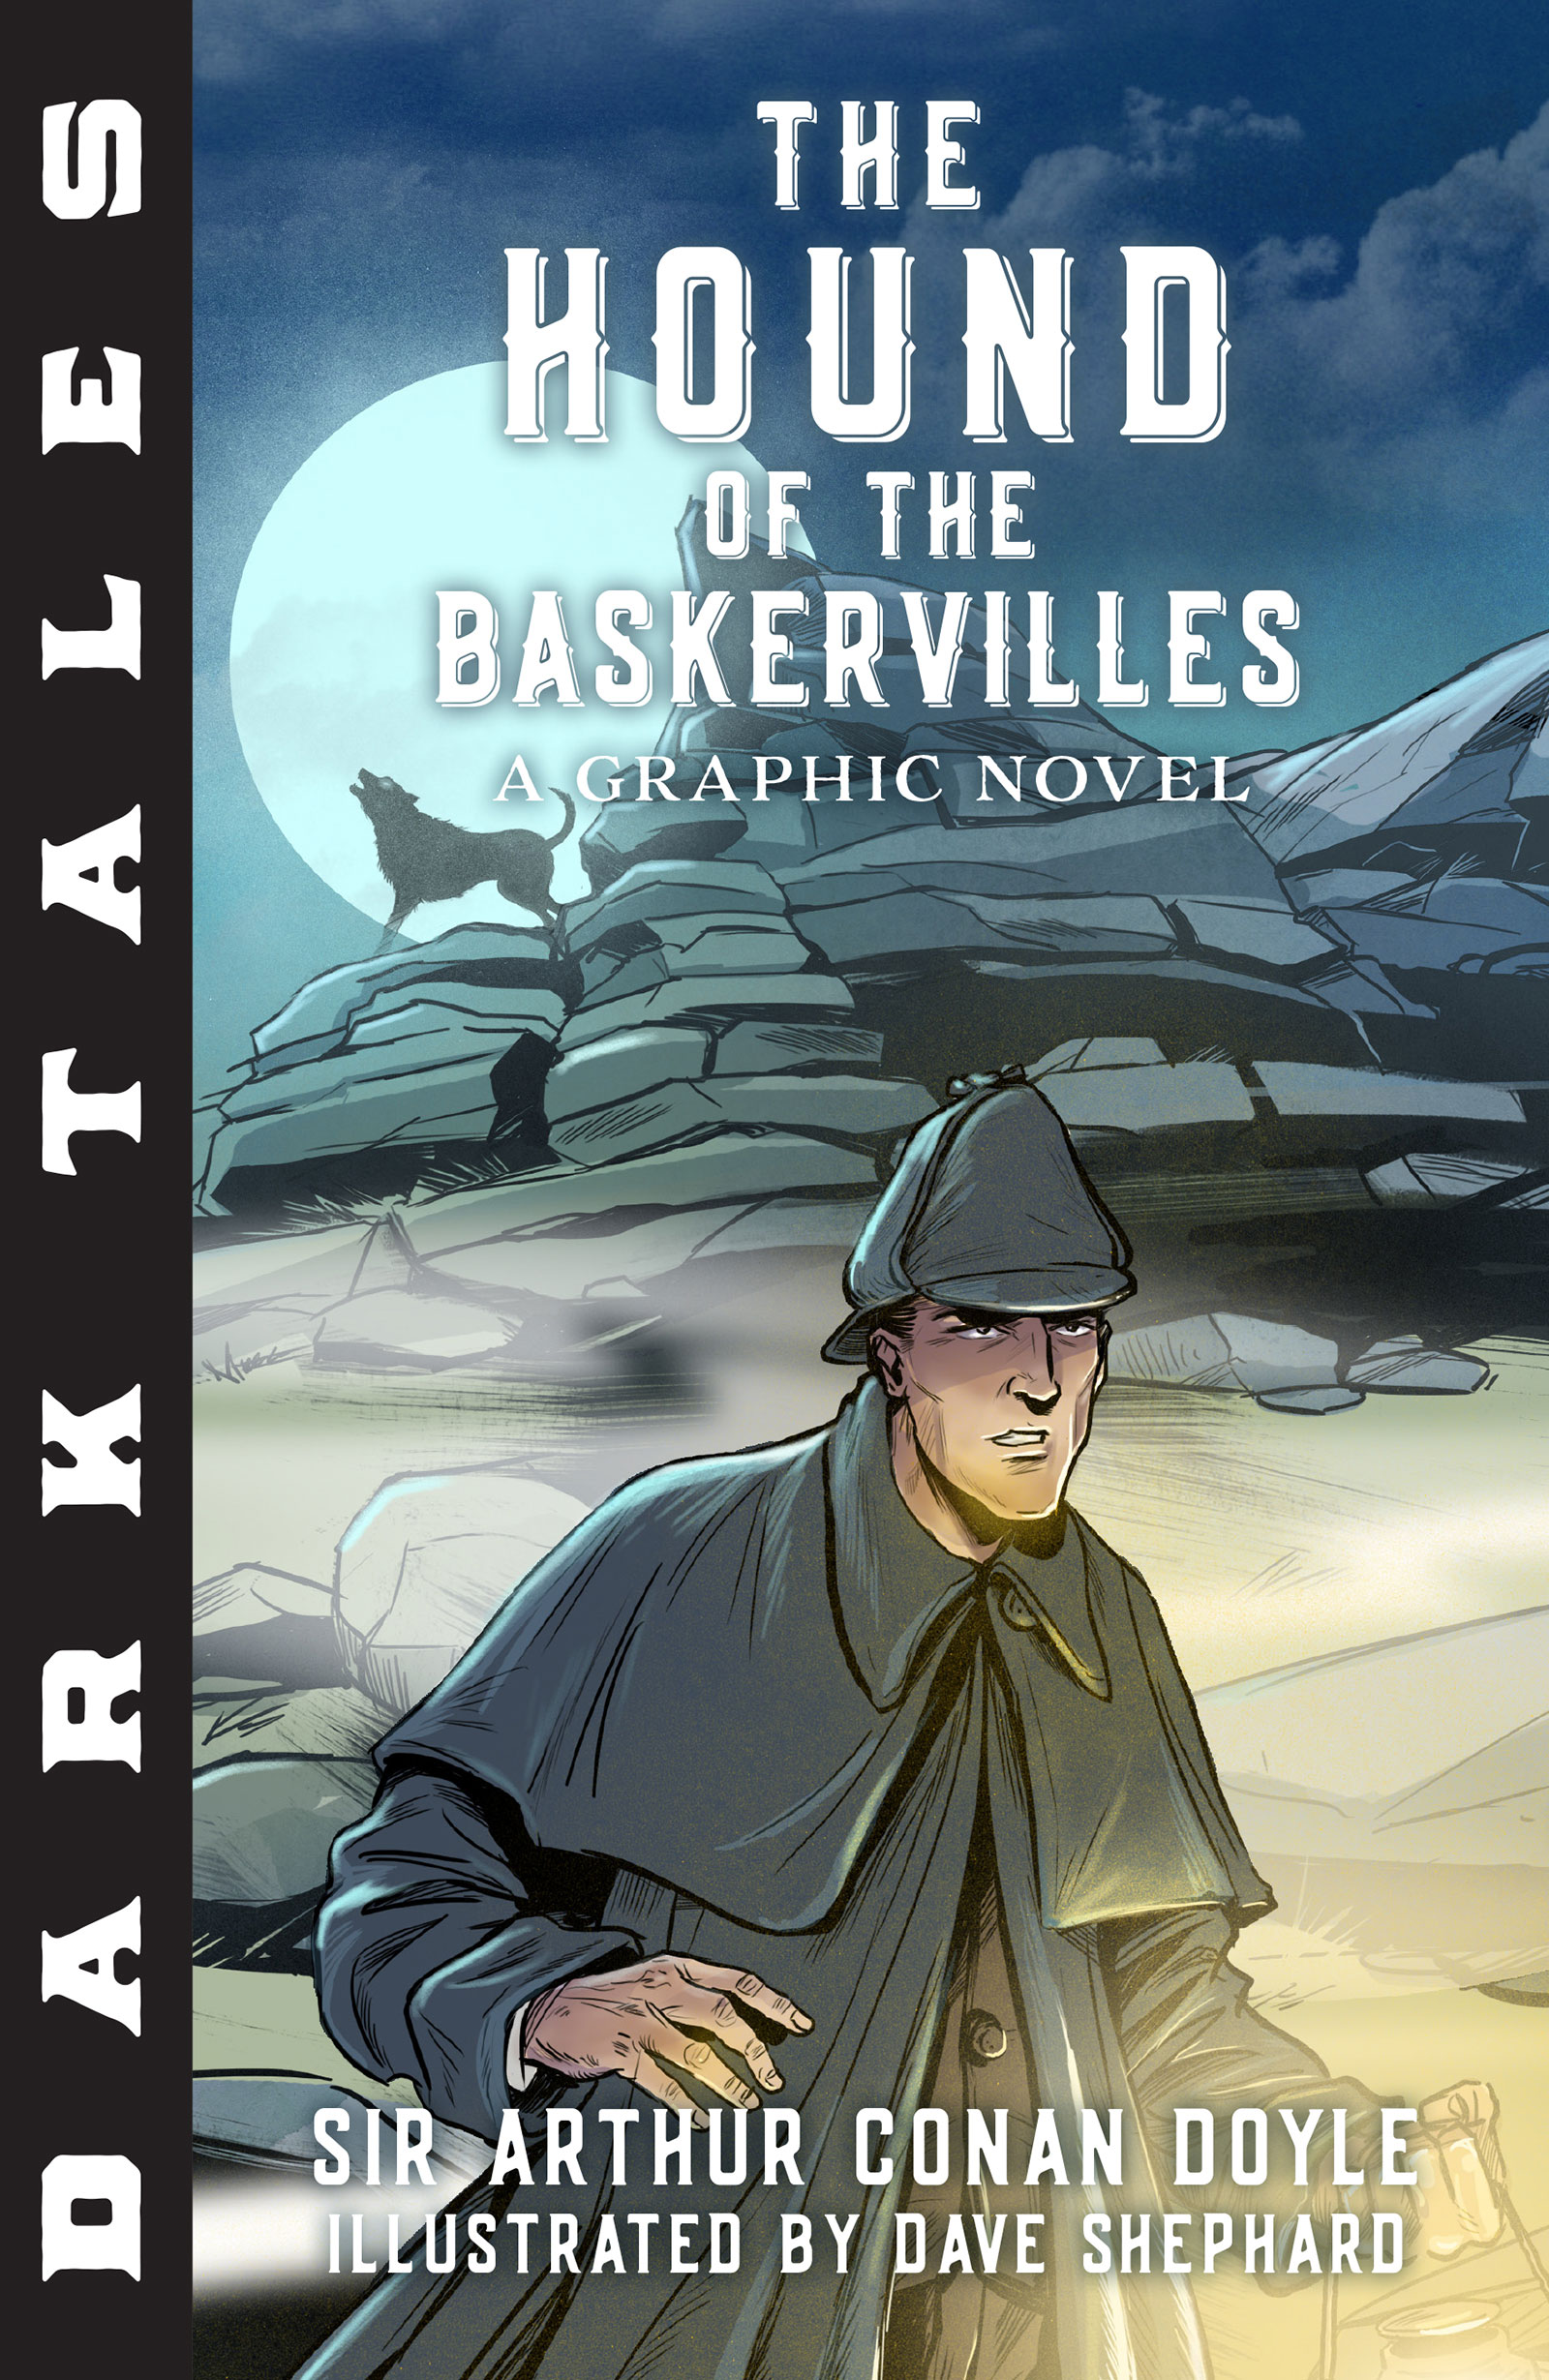 Dark Tales: The Hound of the Baskervilles